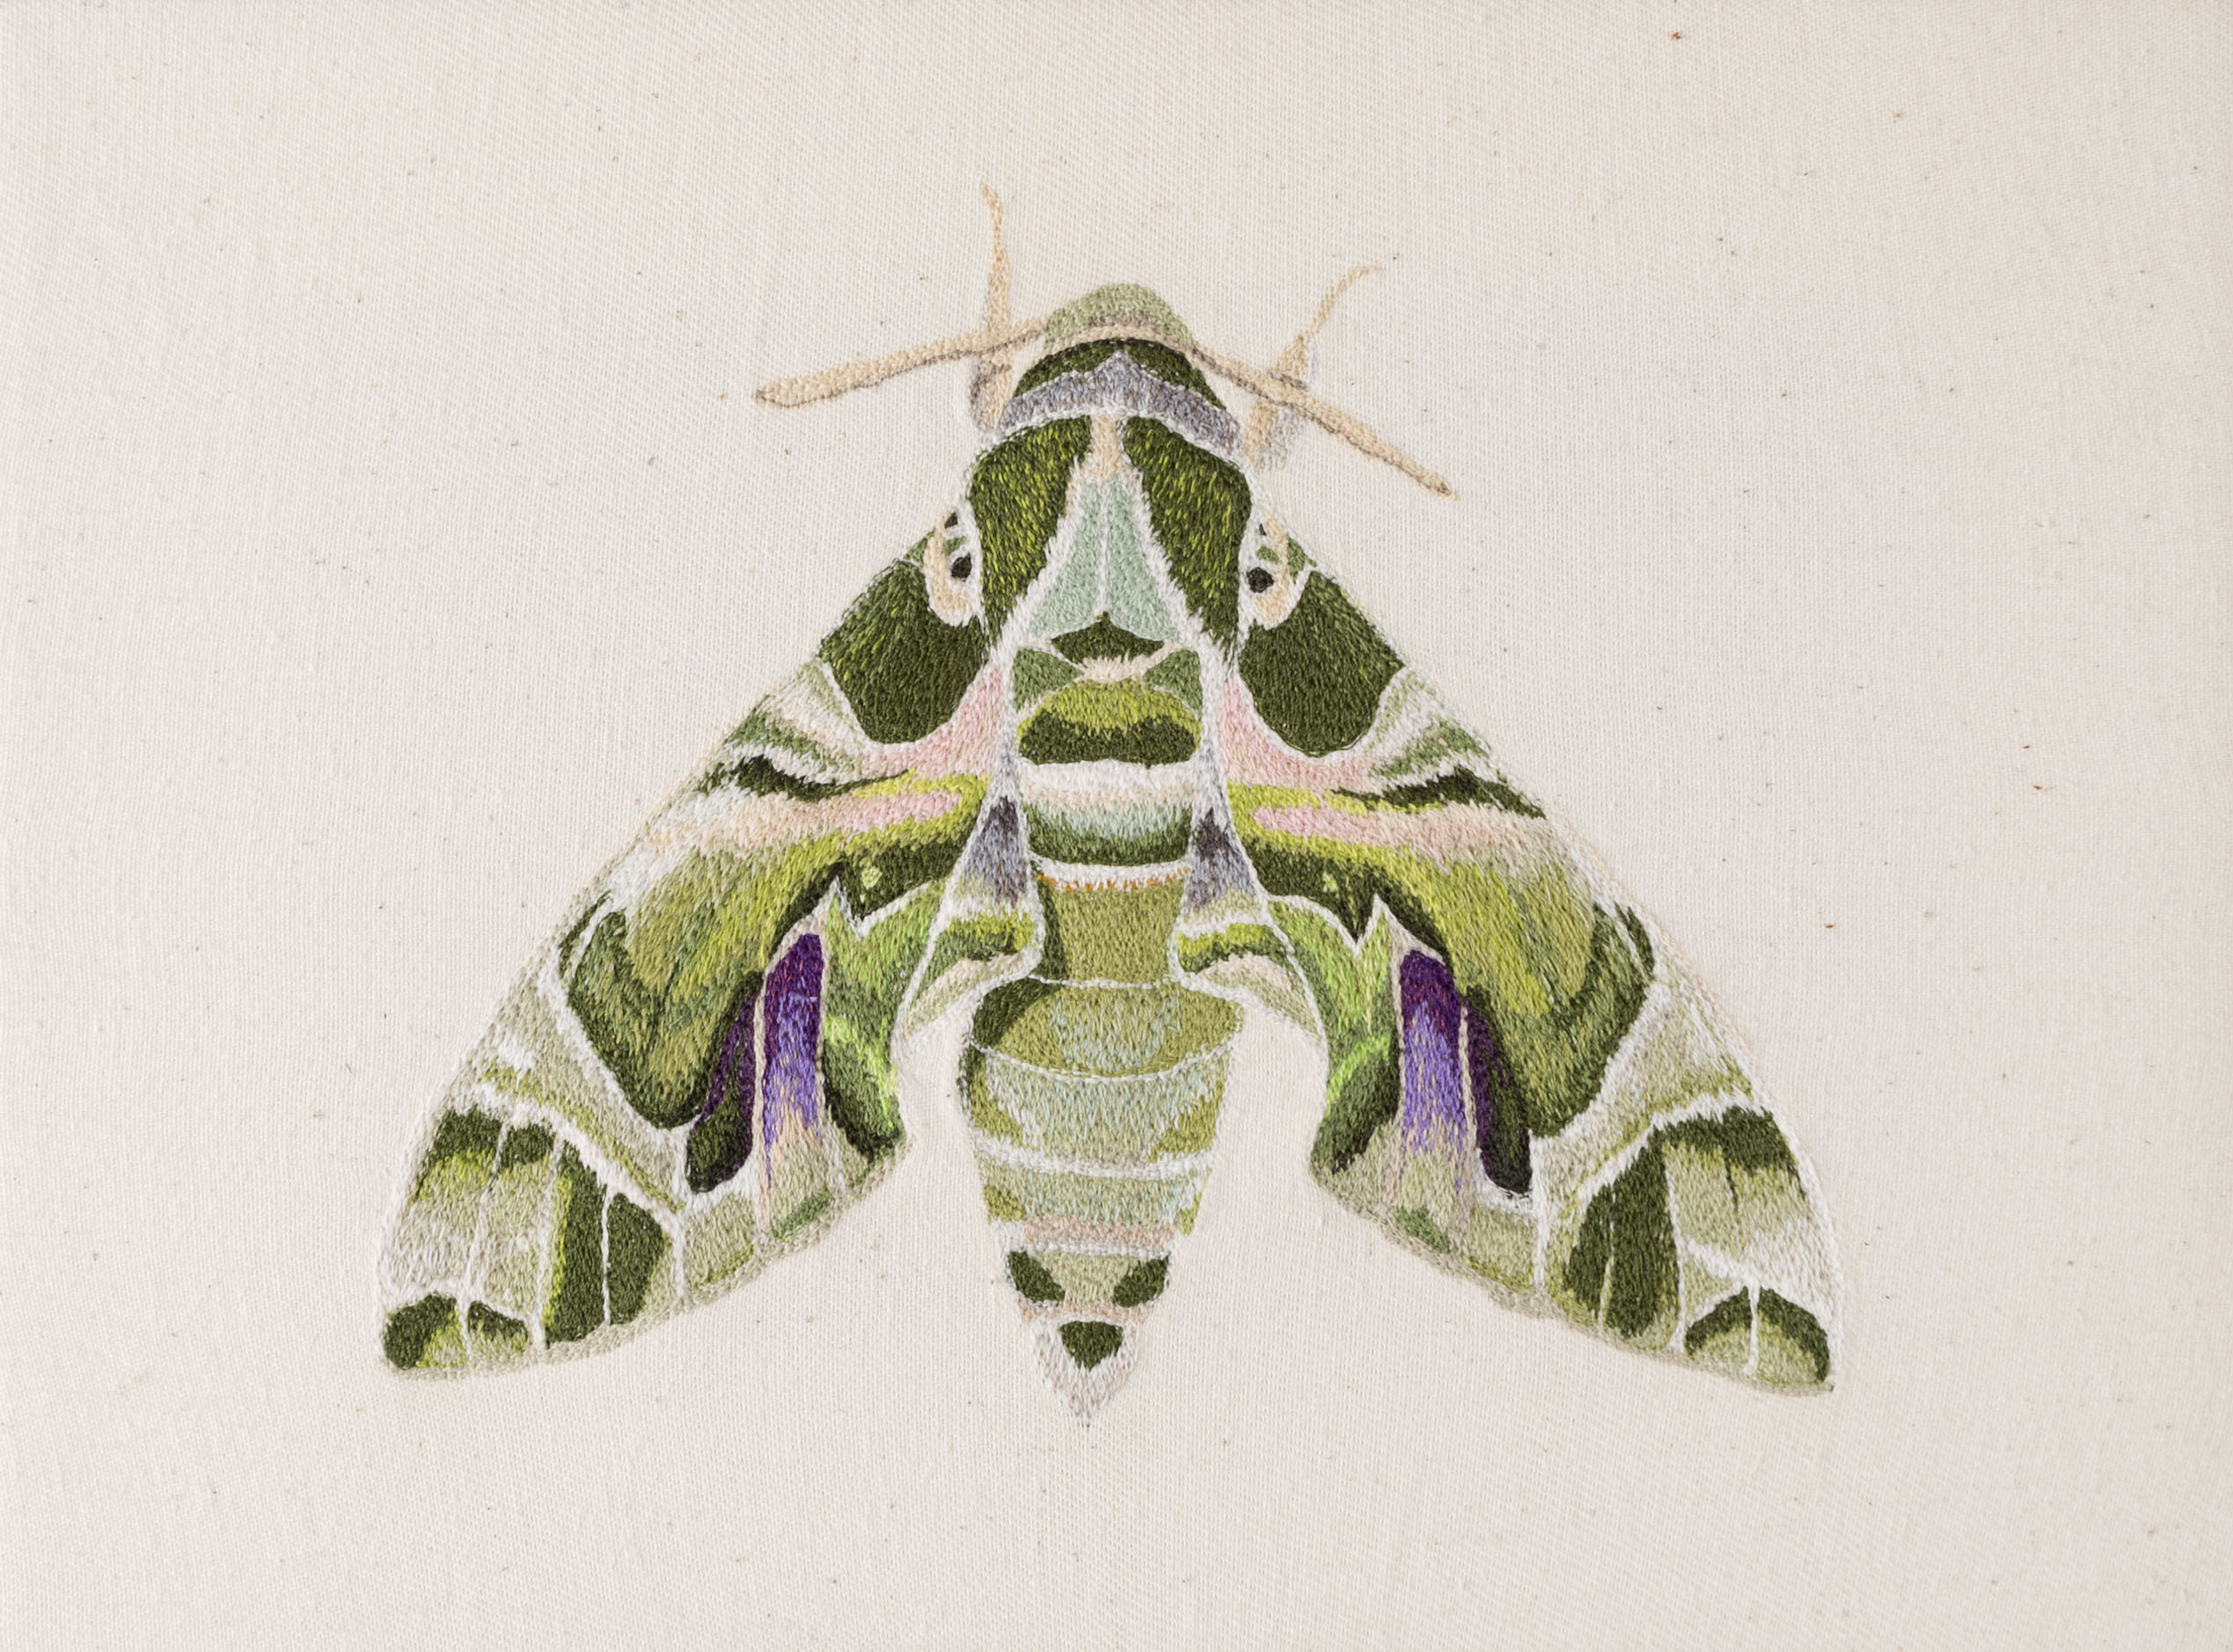 Oleander Hawkmoth Embroidery